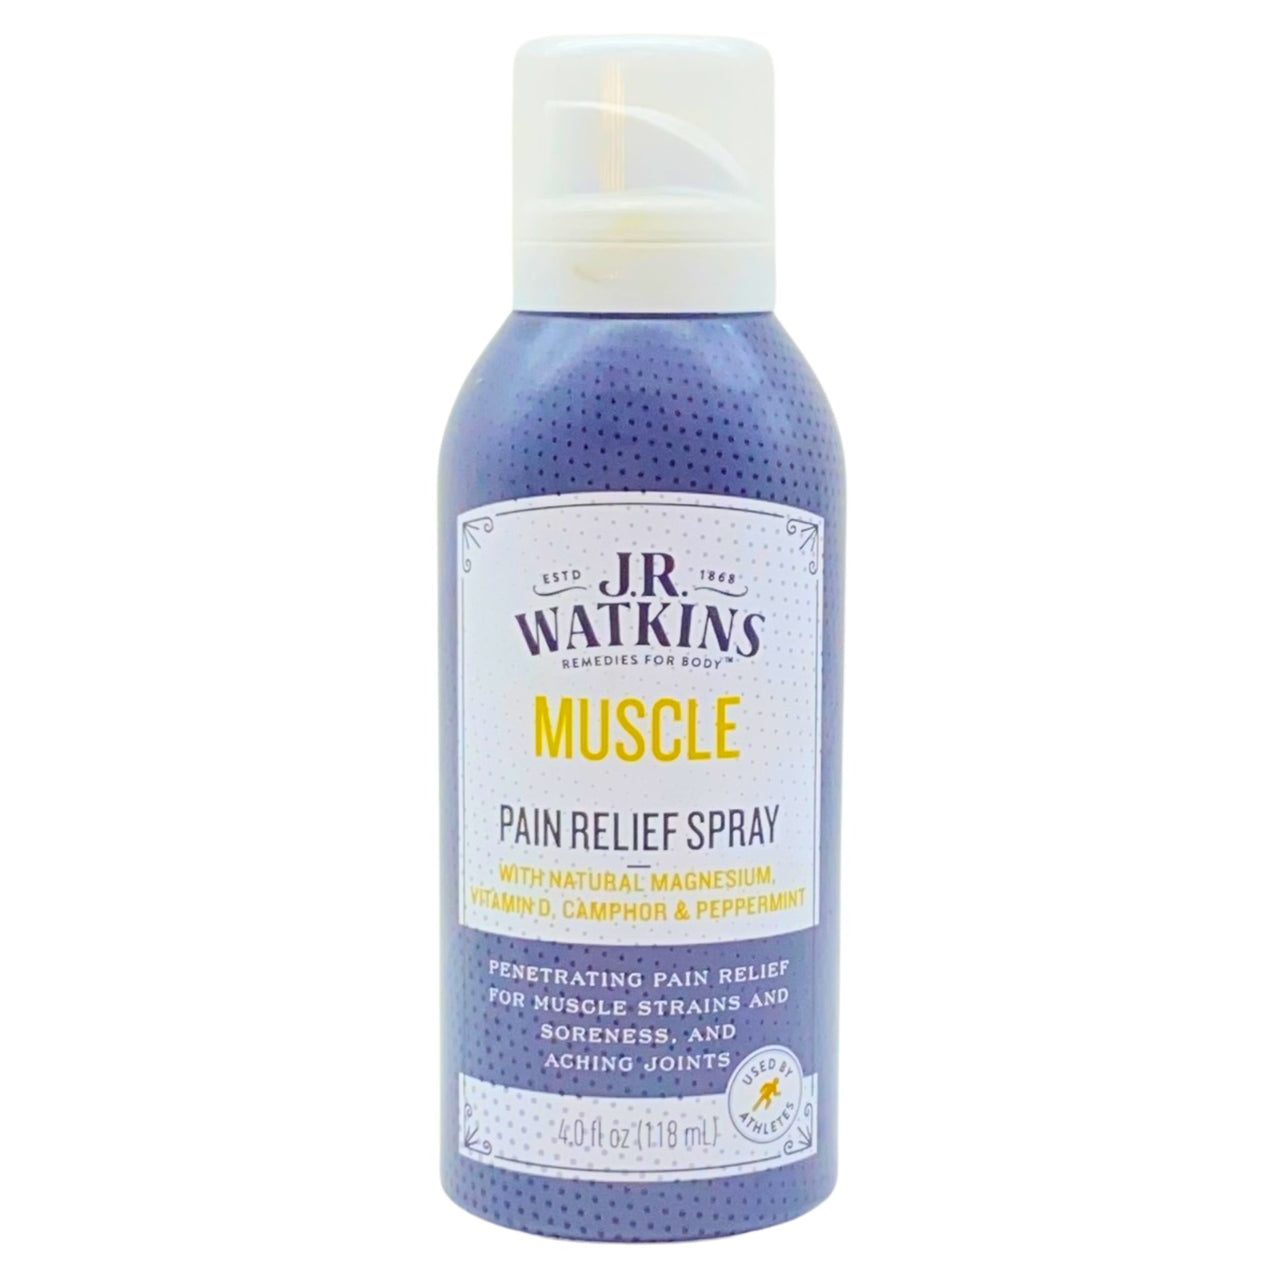 JR Watkins Remedies for Body Muscle Pain Relief Spray 